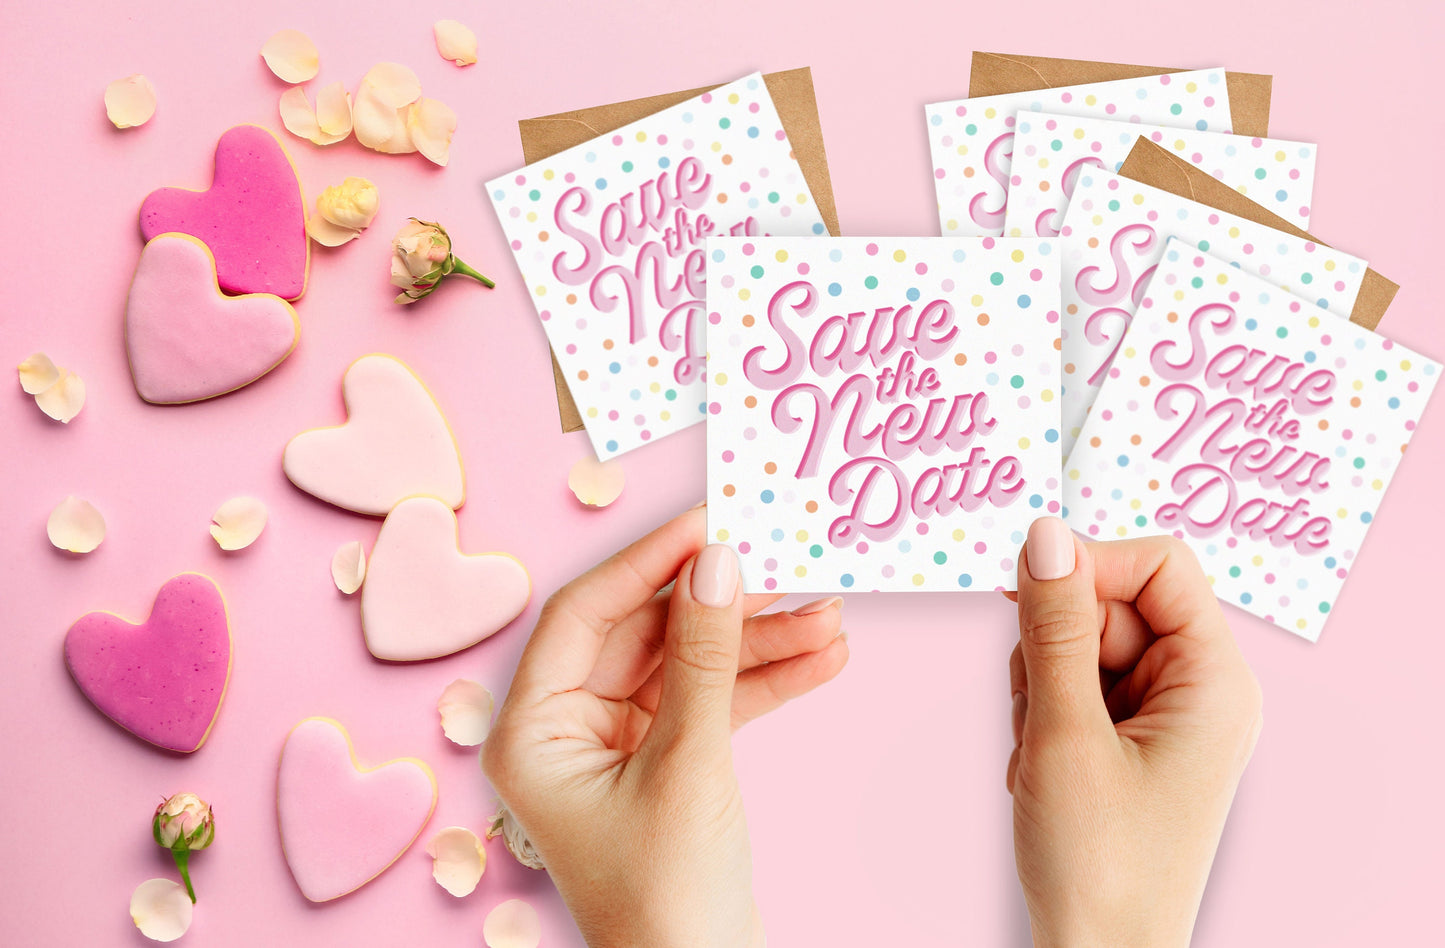 Mini Pack of Happiness - Save The New Date Cards. Wedding Cards. Pack of cards.